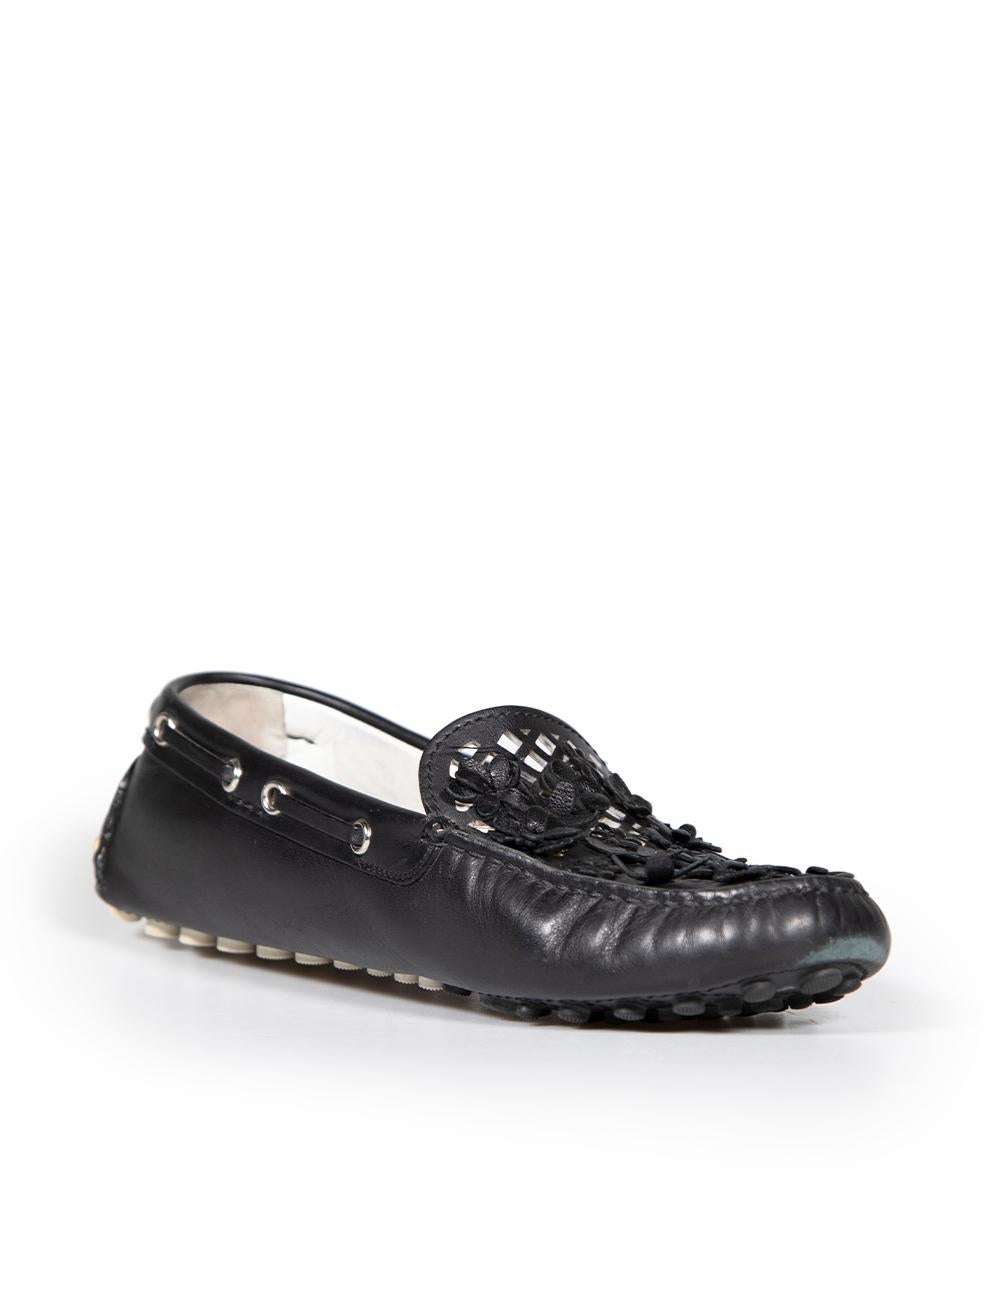 CONDITION is Very good. Minimal wear to shoes is evident. Minimal wear to both shoe toes and the right-side of the right shoe with abrasions and scratches to the leather on this used Dior designer resale item.
 
 
 
 Details
 
 
 Black
 
 Leather
 
